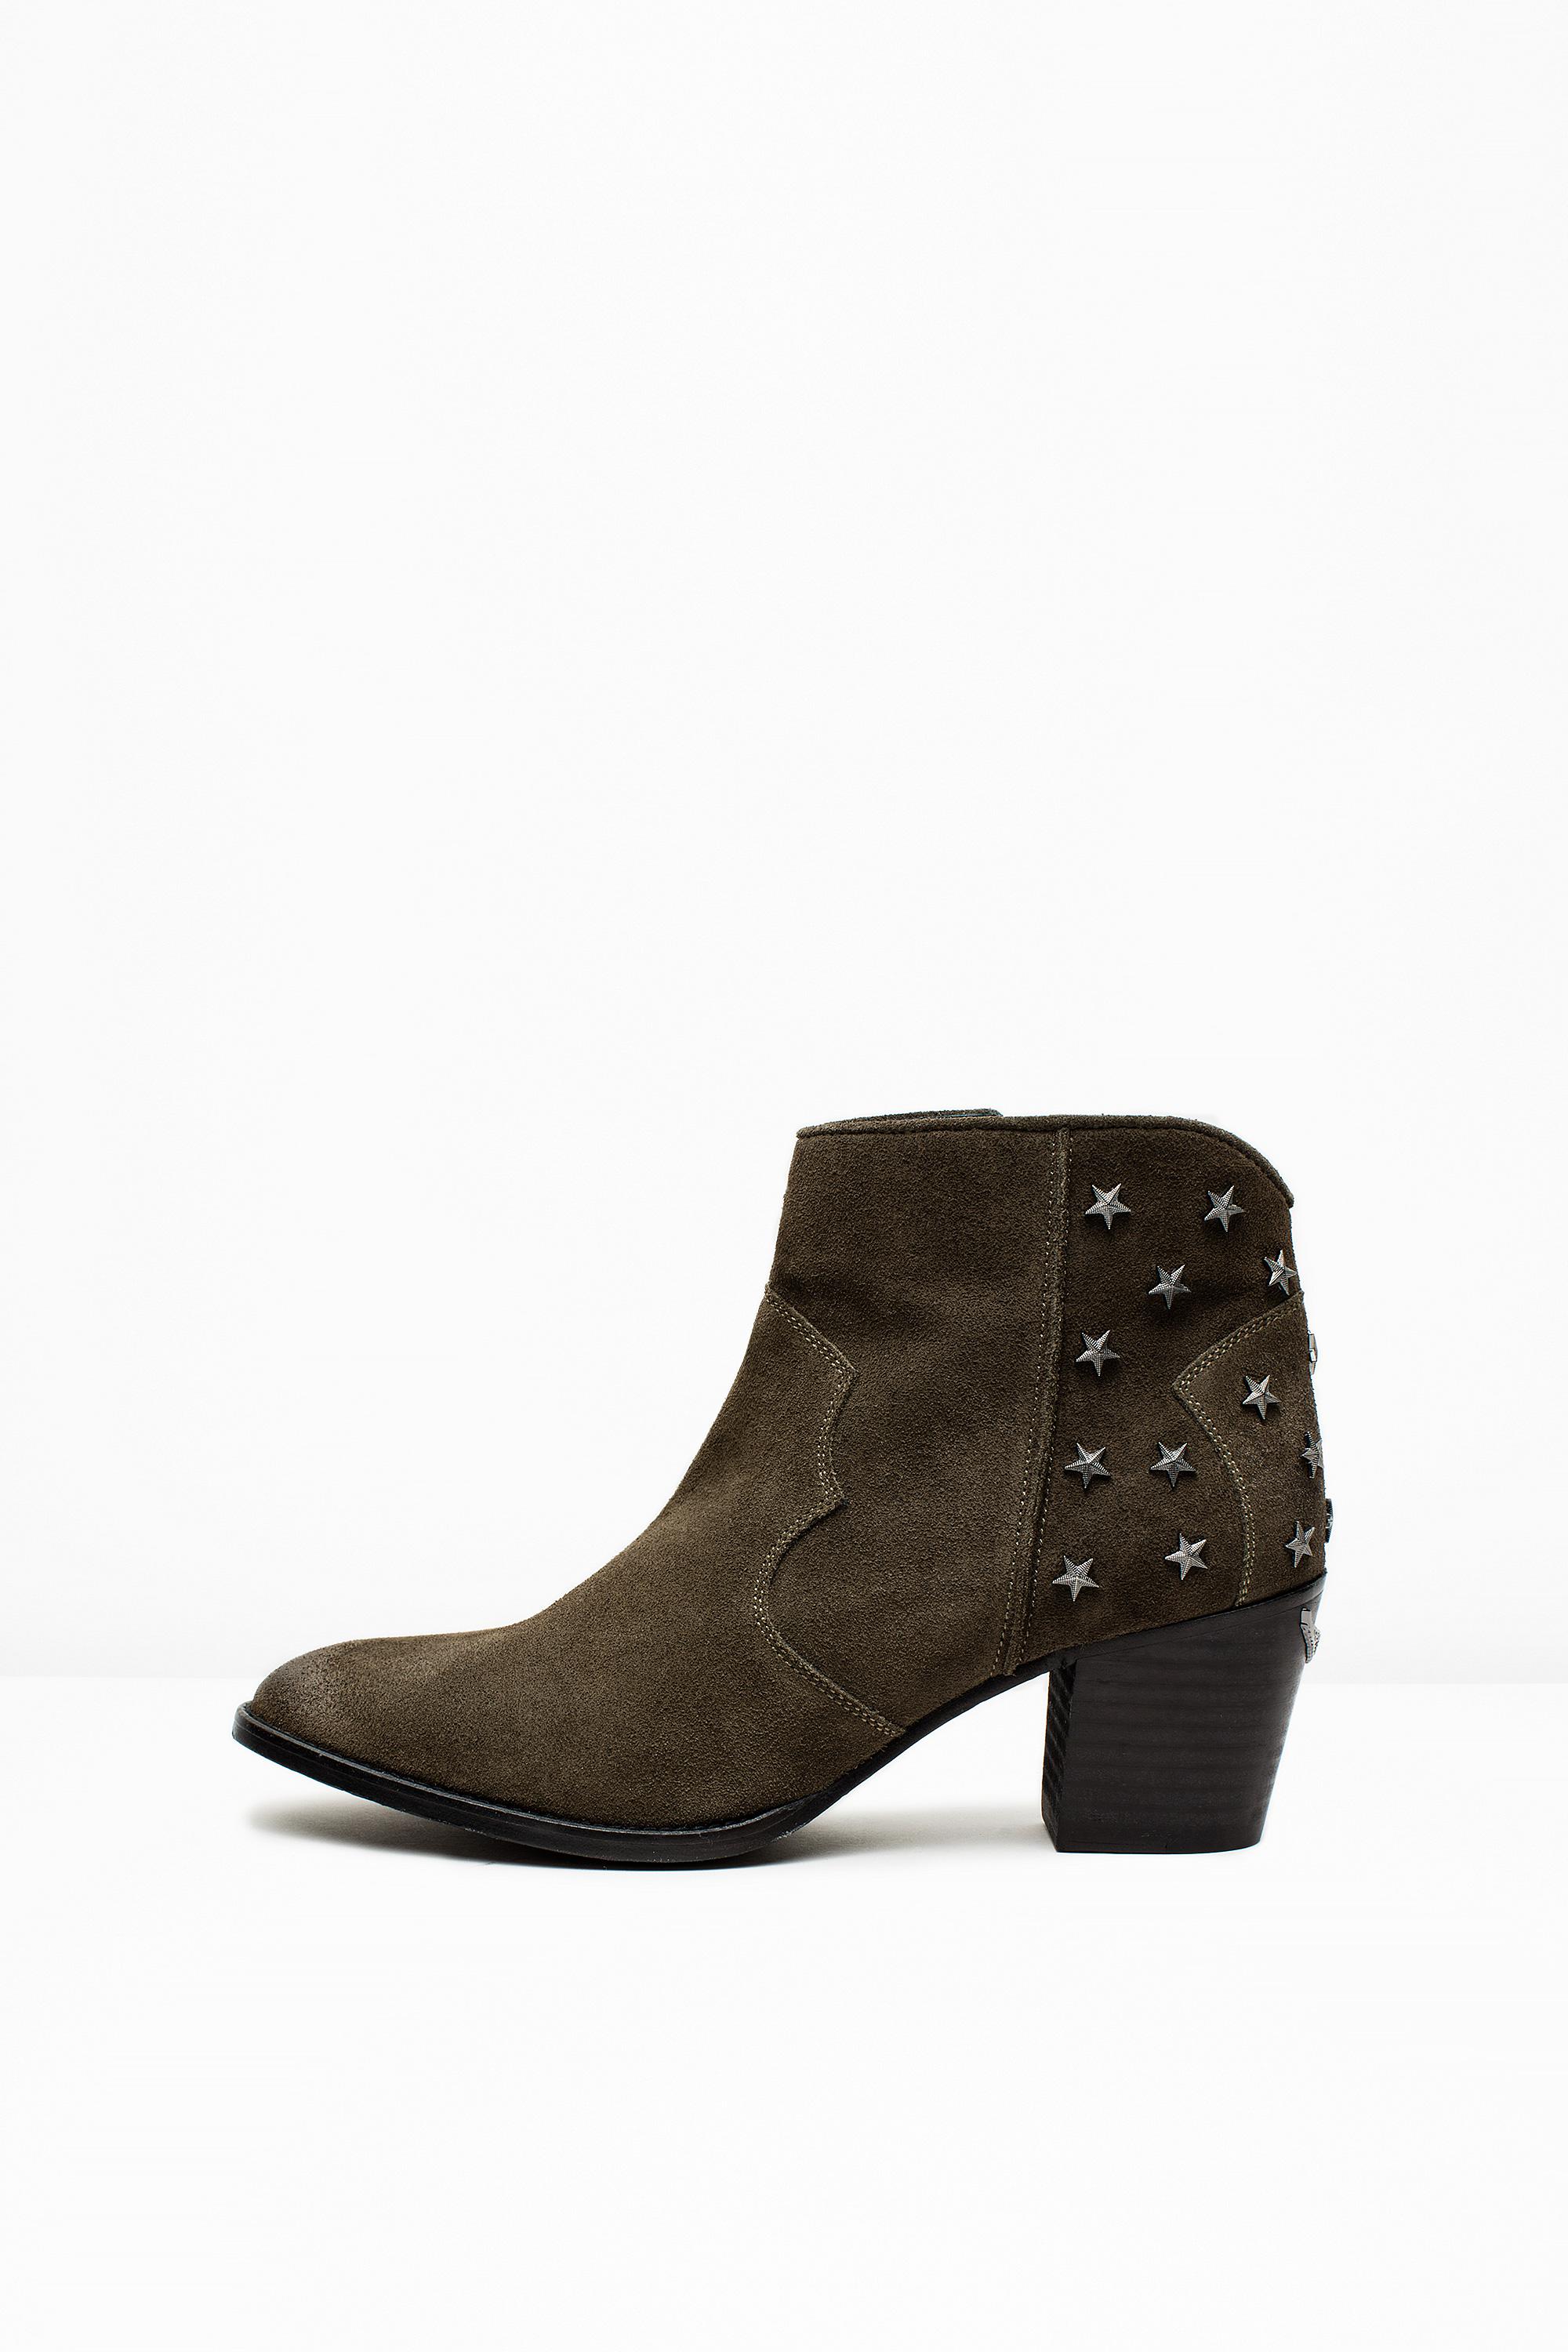 zadig and voltaire molly boots